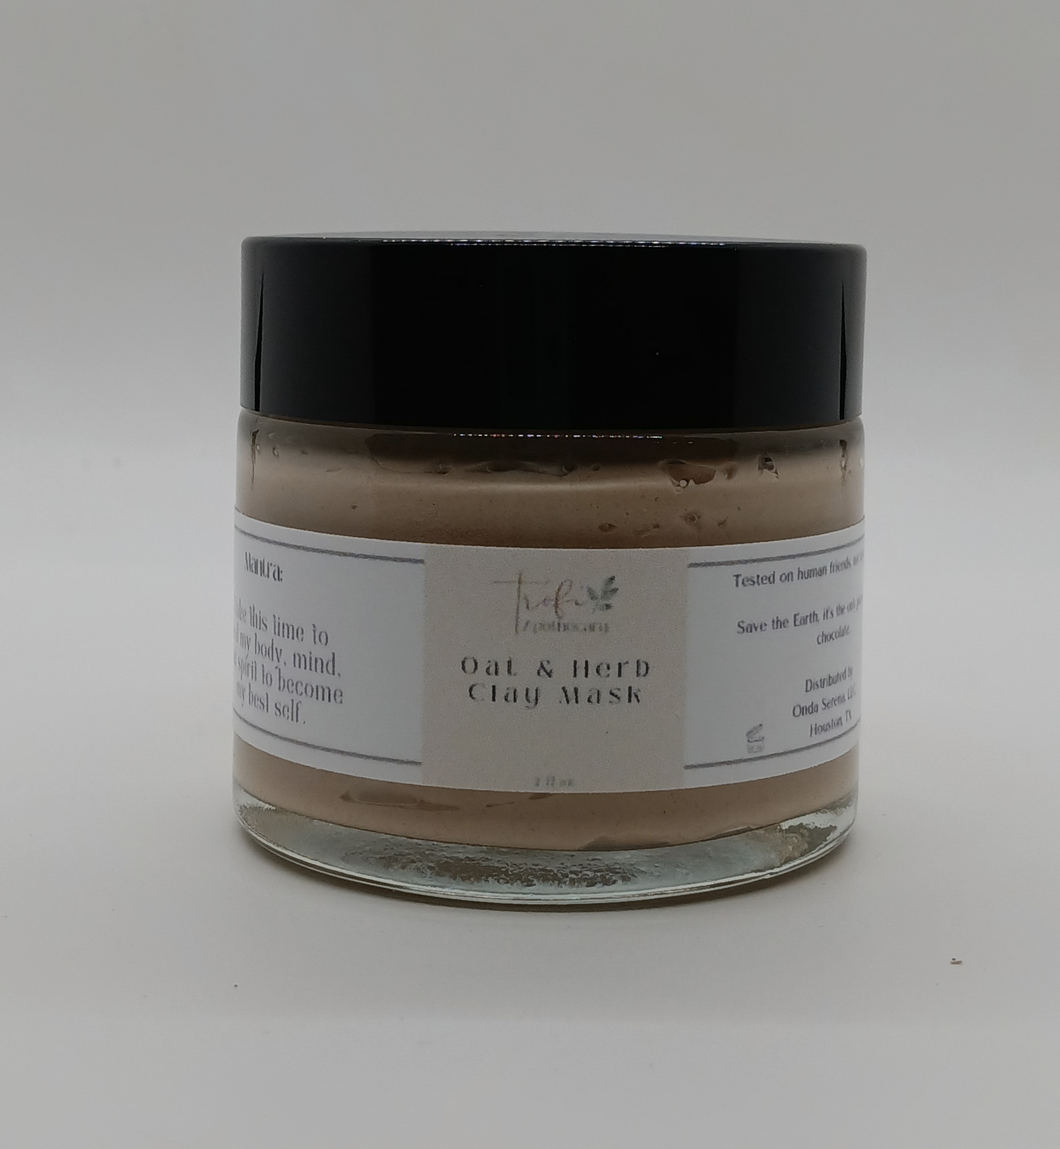 Oat & Herb Clay Mask